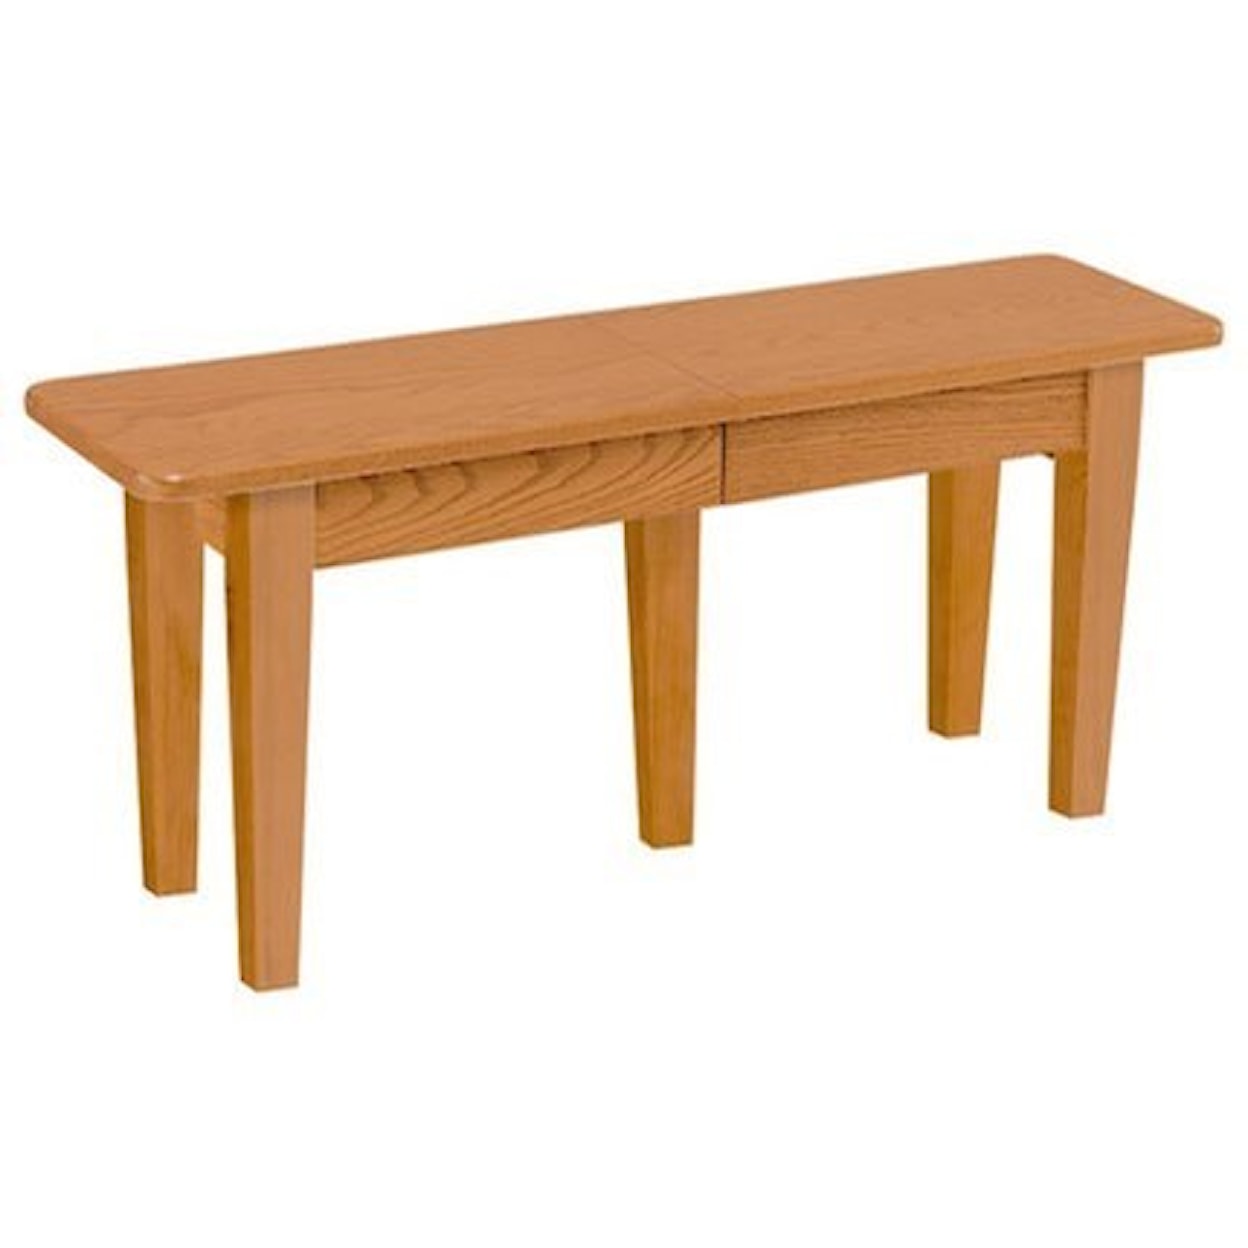 Daniels Amish Chairs and Barstools Solid Top Extendable Bench